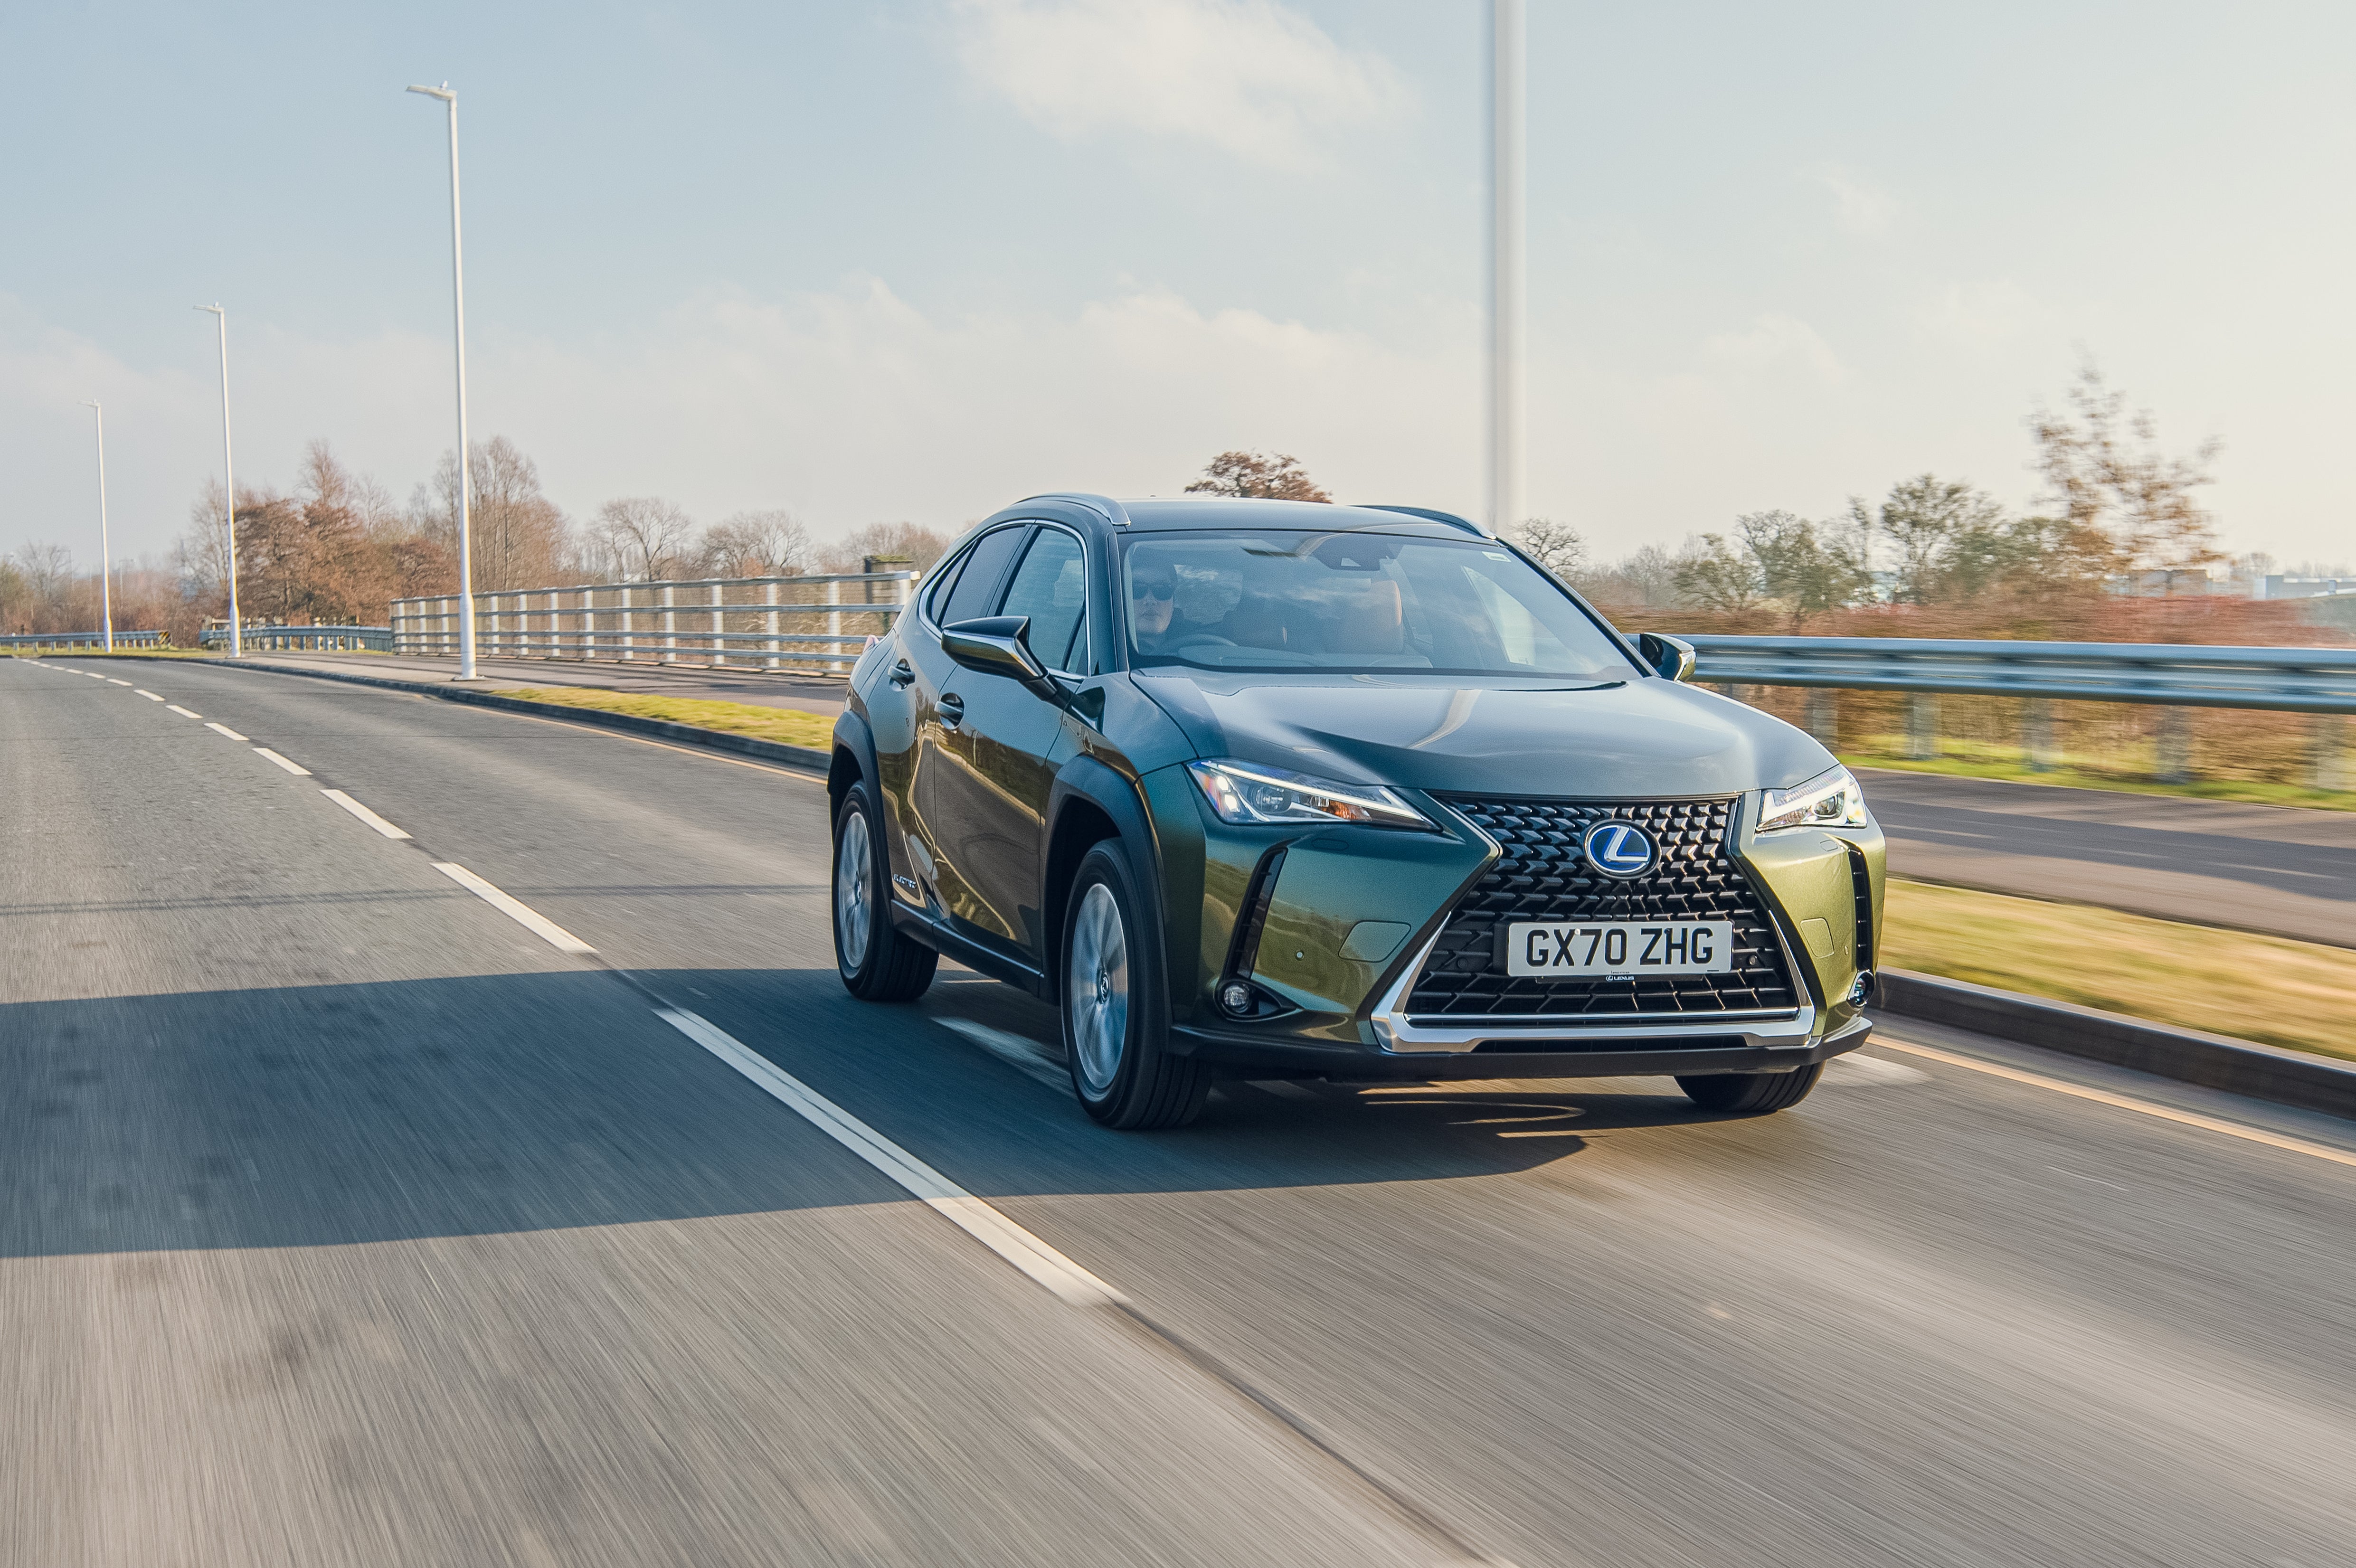 The Lexus UX 300e is the first ‘proper’ battery electric vehicle from the Toyota group